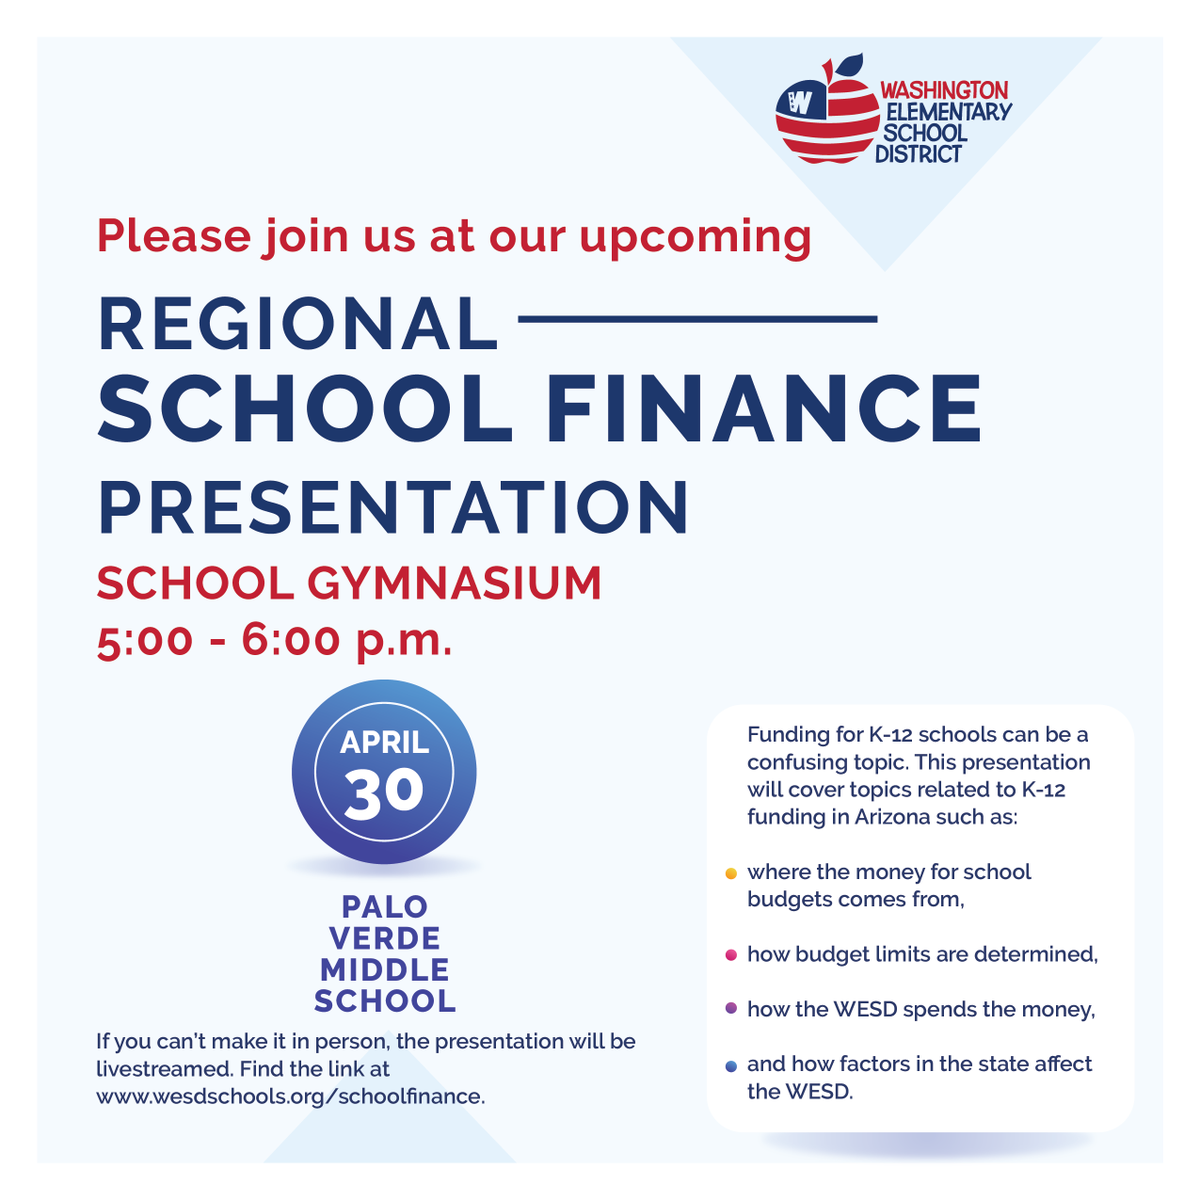 If you are interested in learning about school finance, please join us tomorrow, April 30, at Palo Verde. This presentation is open to all and will cover topics related to K-12 funding in Arizona. It will also be livestreamed on YouTube at youtube.com/live/tLPeW-jgF…. #WESDFamily